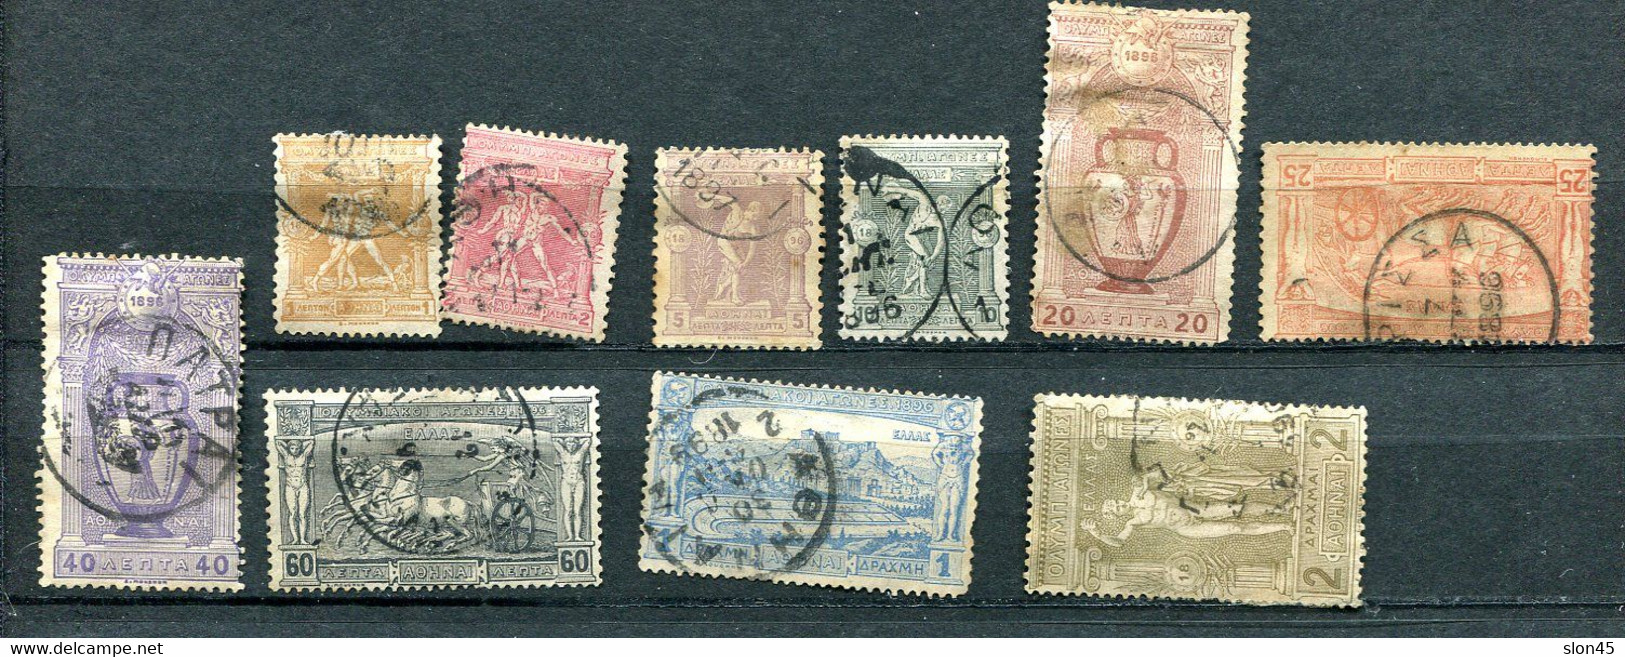 Greece 1896 First Olympic Games Used Up To 2dr Sc 117-126 12019 - Used Stamps